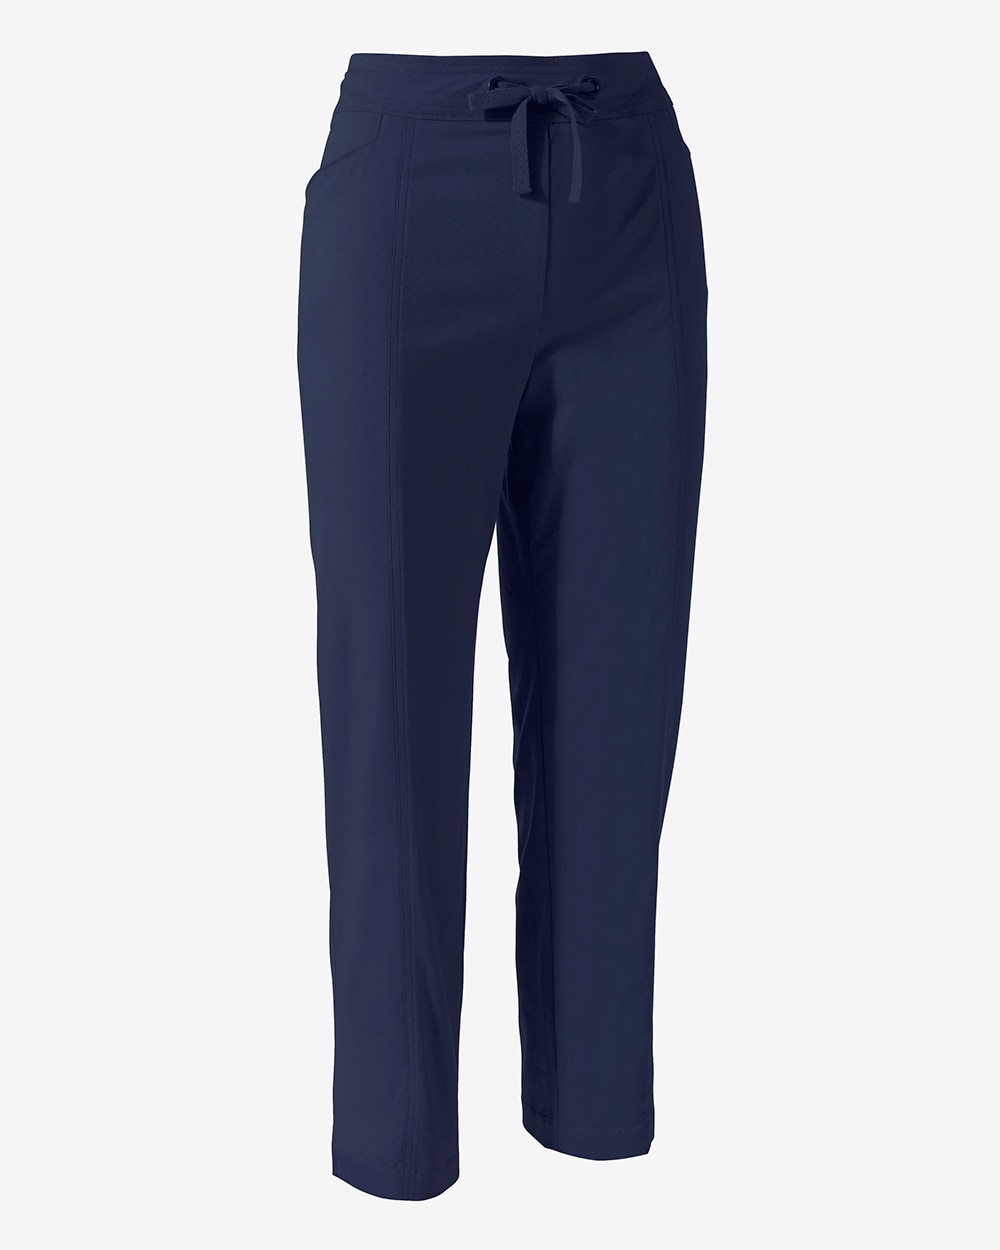 Weekends Perfect Stretch Slim Pants